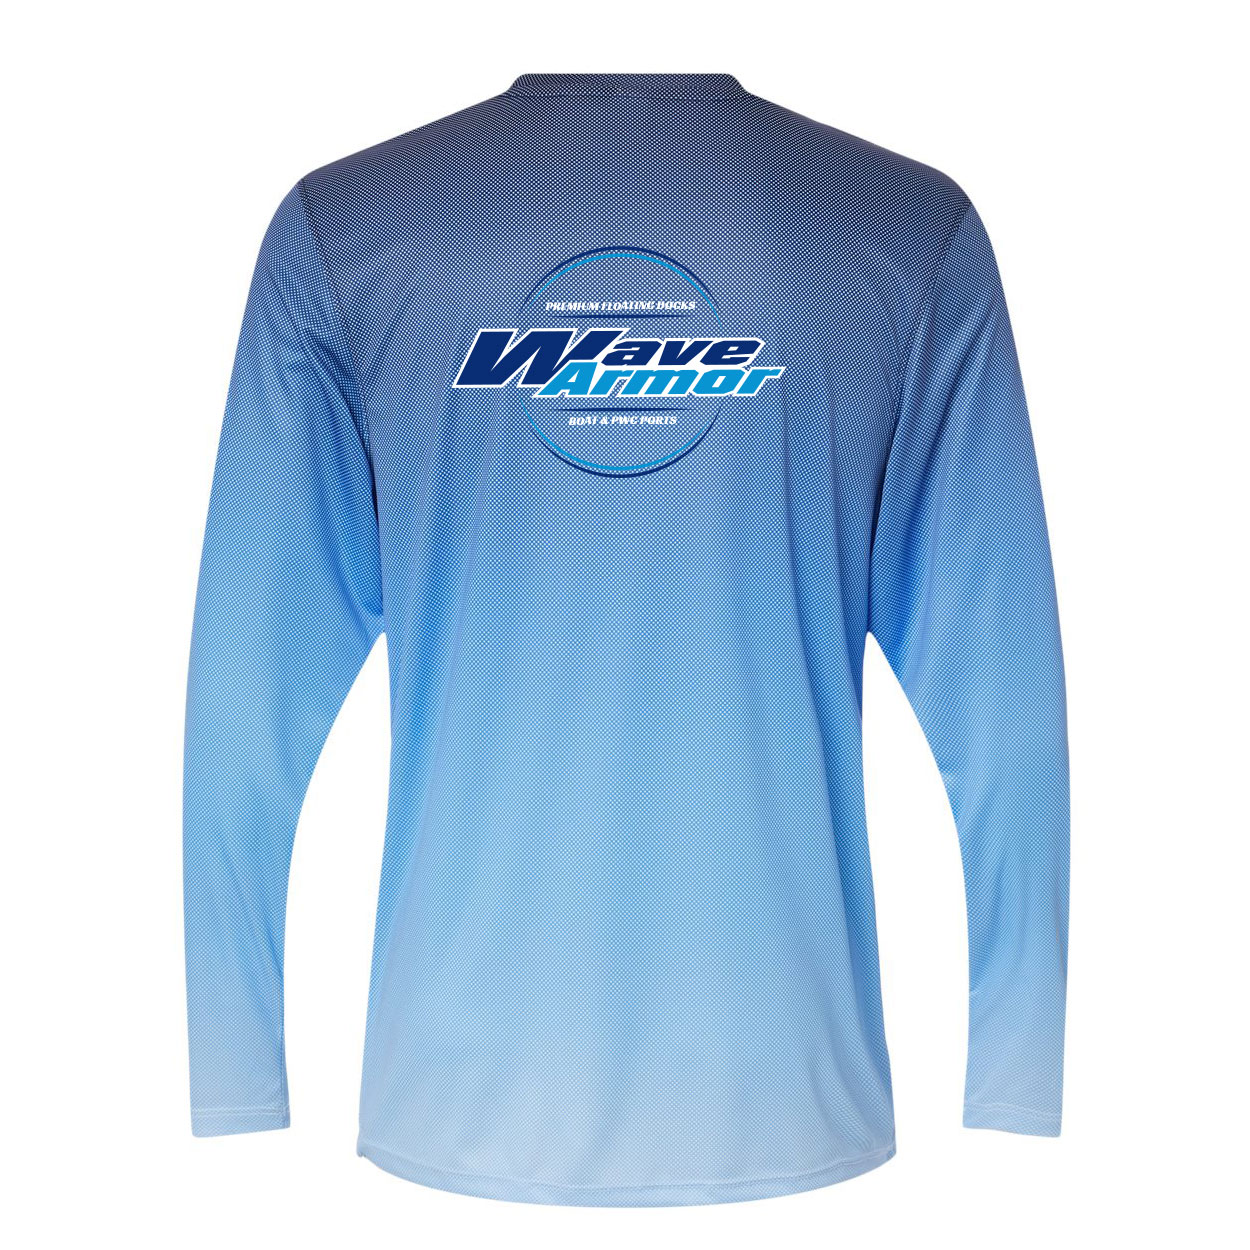 Advanced Upf Shirt For Water Activities Prowess 